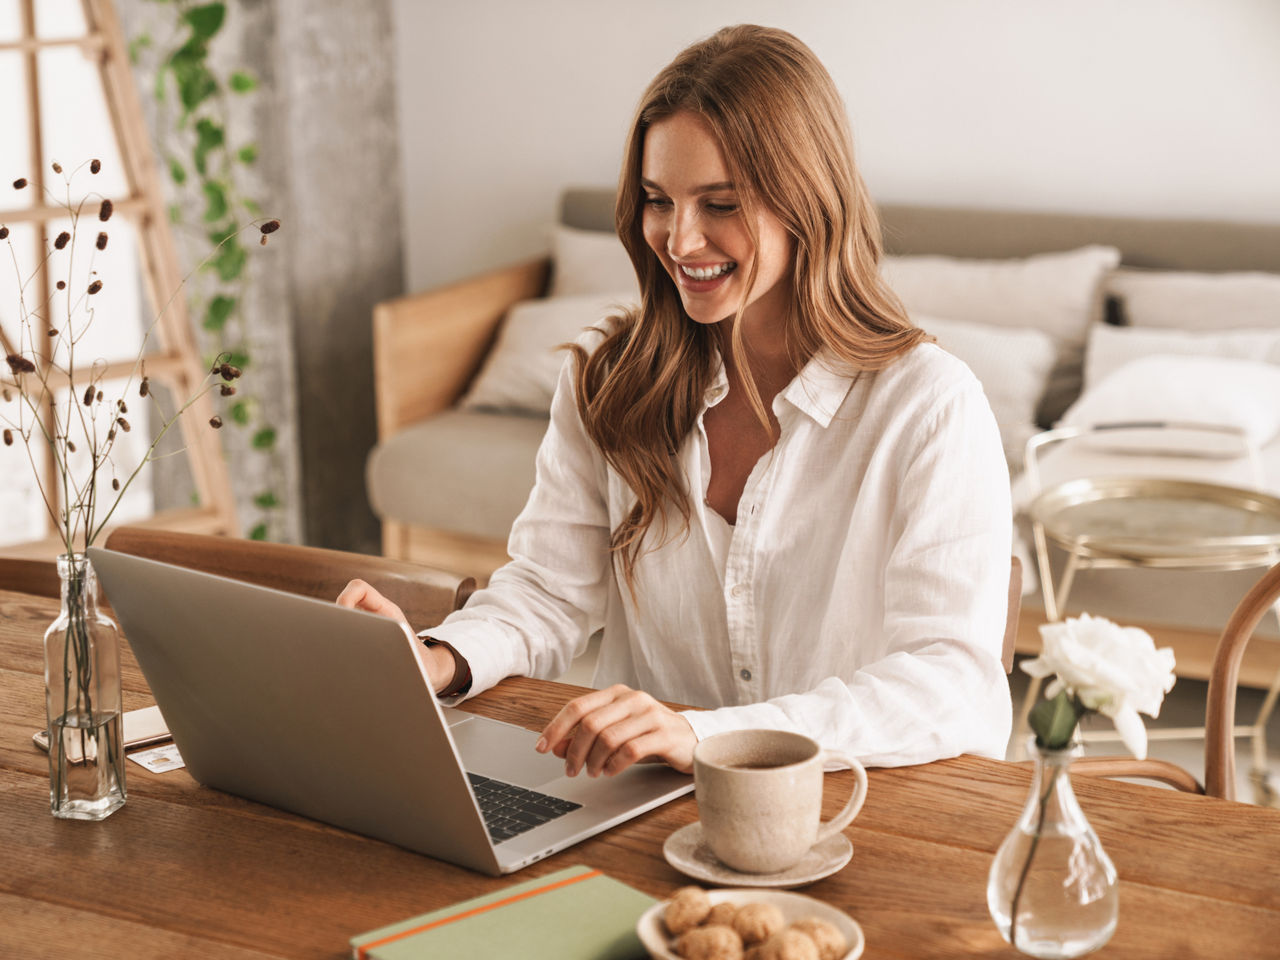 Business woman sits indoors using laptop computer